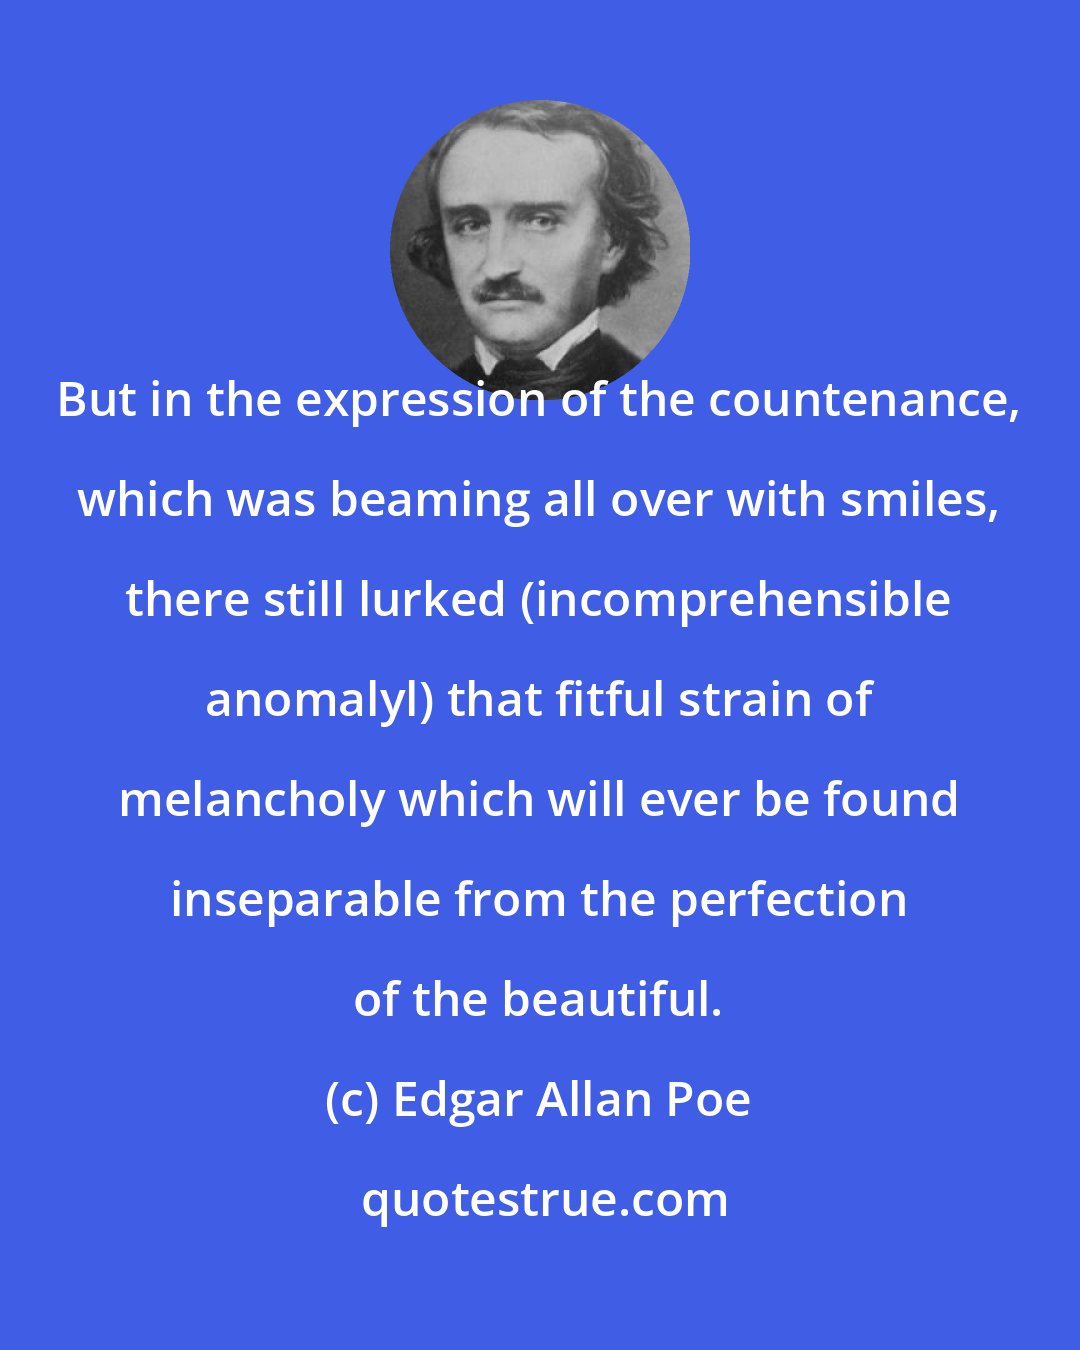 Edgar Allan Poe: But in the expression of the countenance, which was beaming all over with smiles, there still lurked (incomprehensible anomalyl) that fitful strain of melancholy which will ever be found inseparable from the perfection of the beautiful.